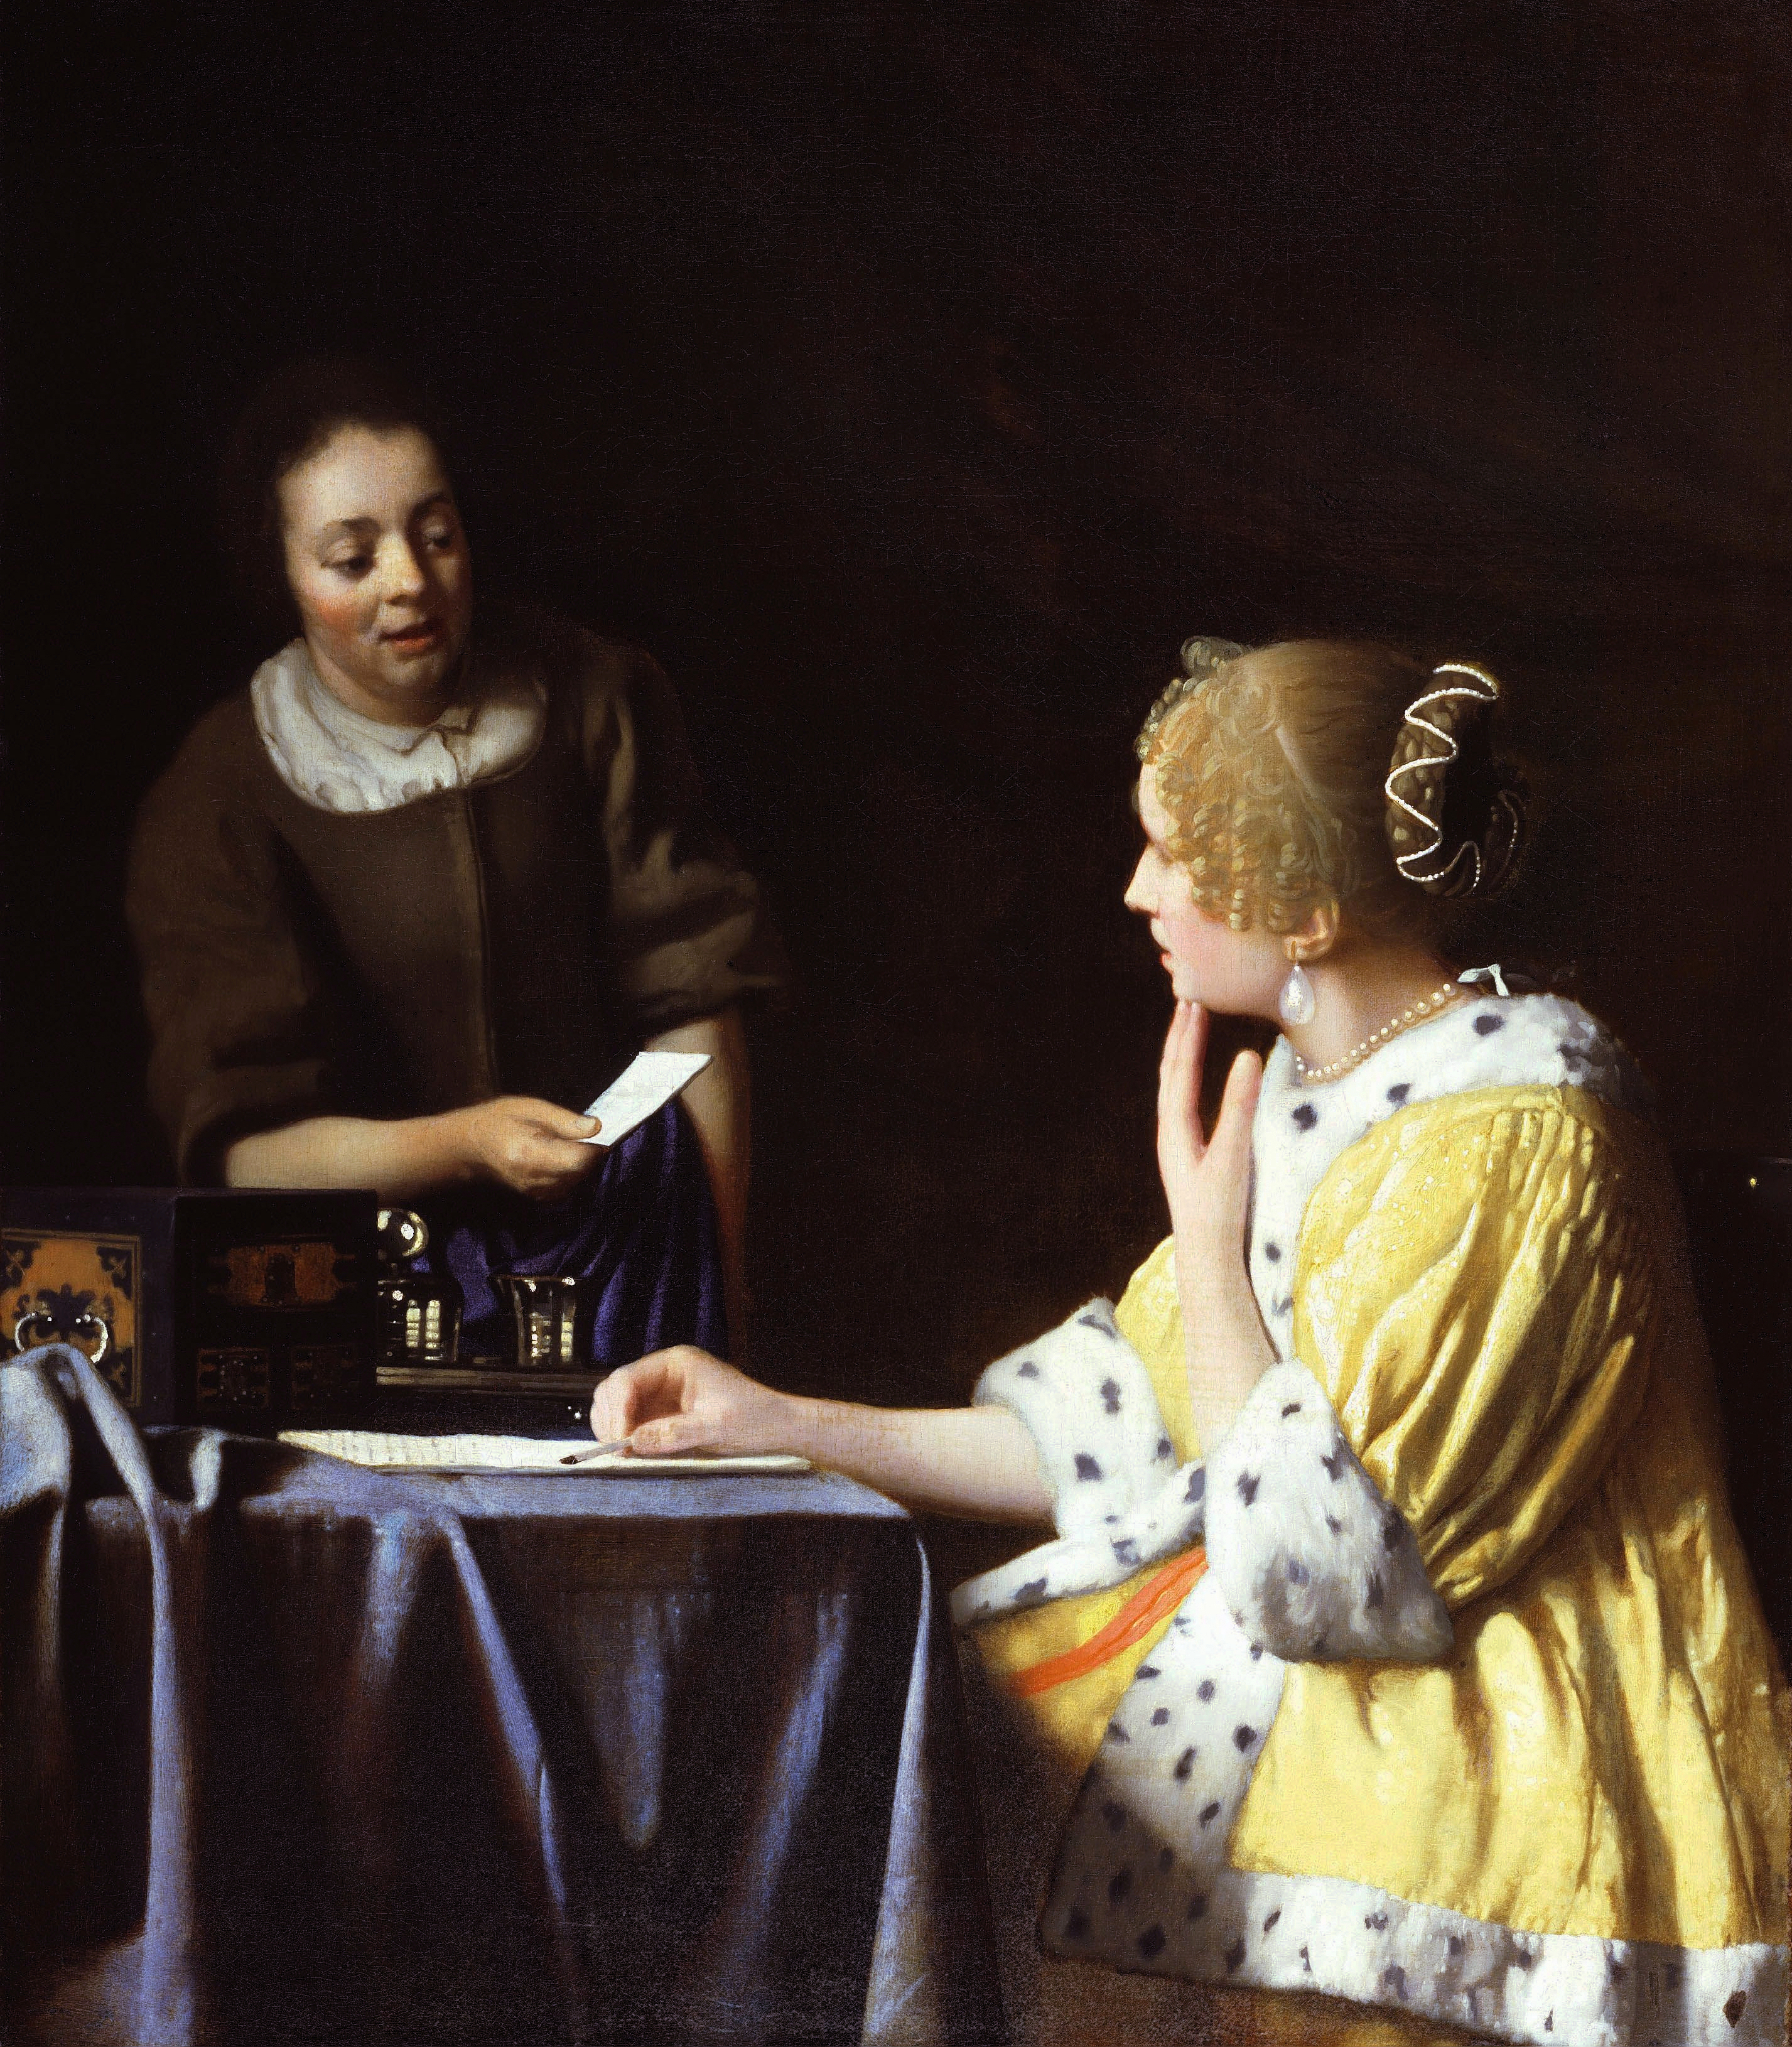 Mistress and Maid by Johannes Vermeer - 1666/1667 - 90.2 x 78.7 cm The Frick Collection